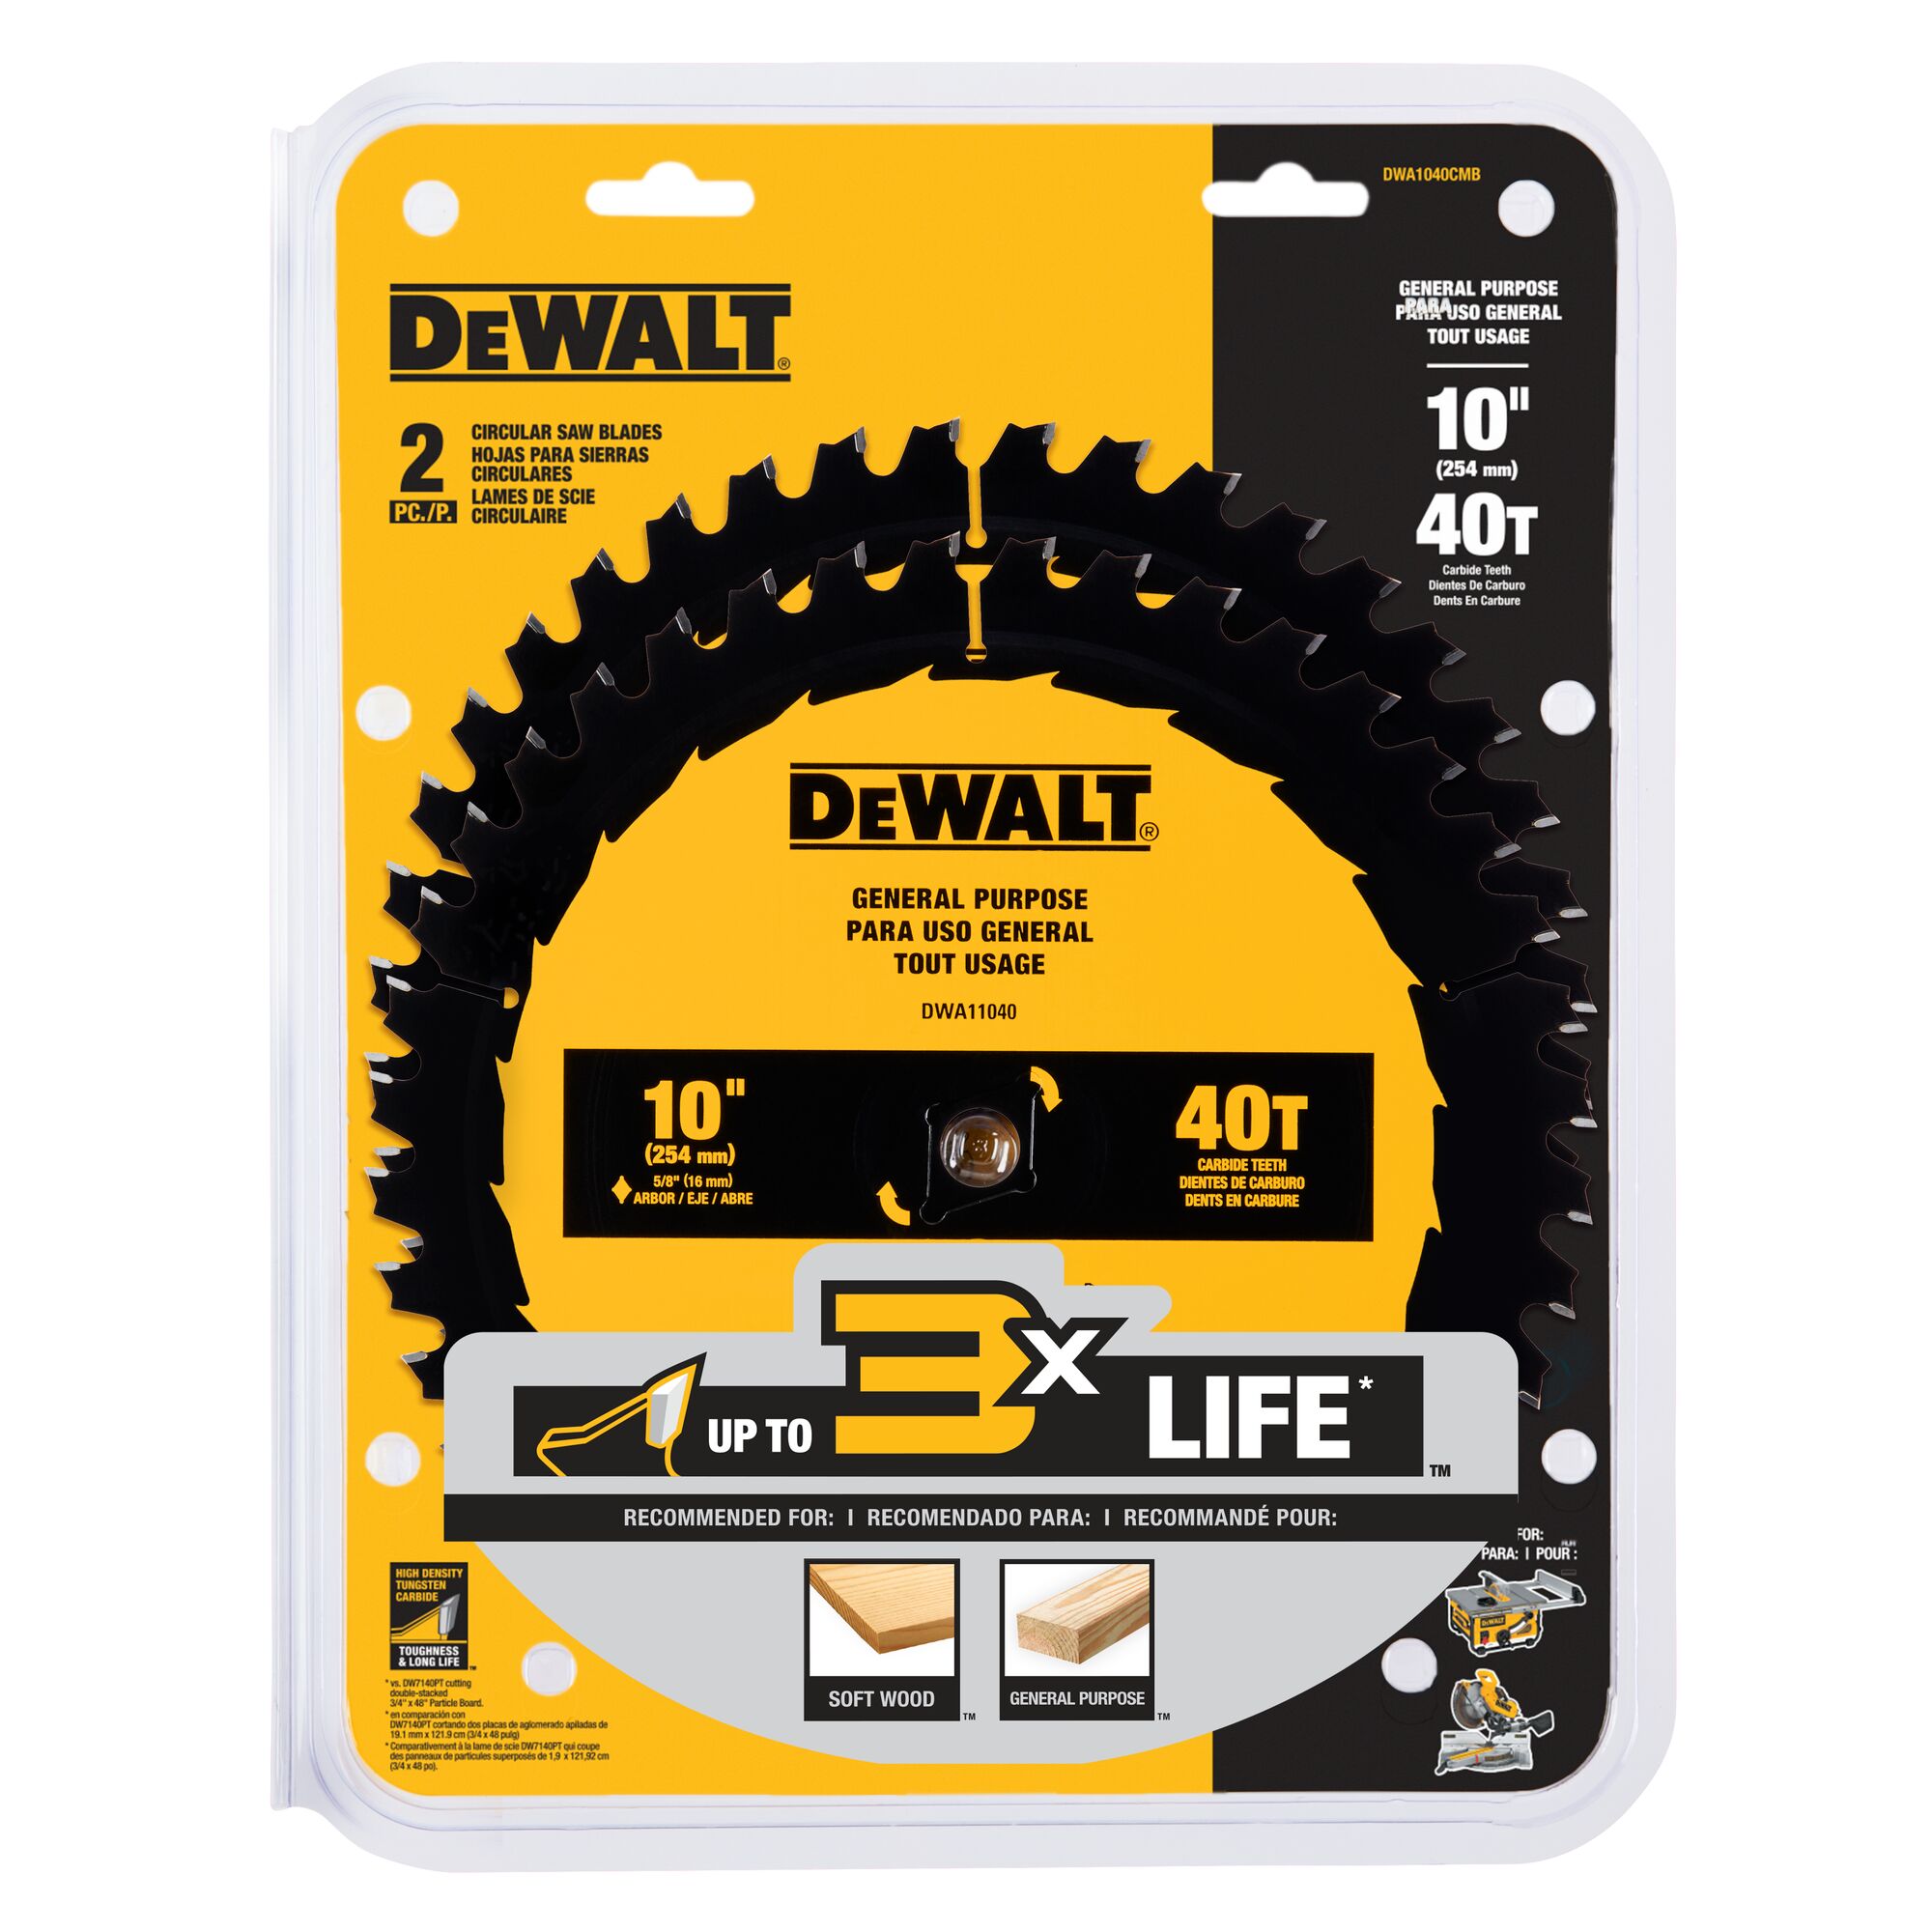 Lowes: DEWALT Large Diameter Saw Blades 10-in 40-Tooth Rough Finish Tungsten Carbide-tipped Steel Miter/Table Saw Blade Set (2-Pack) $25 (usually $50) in store YMMV